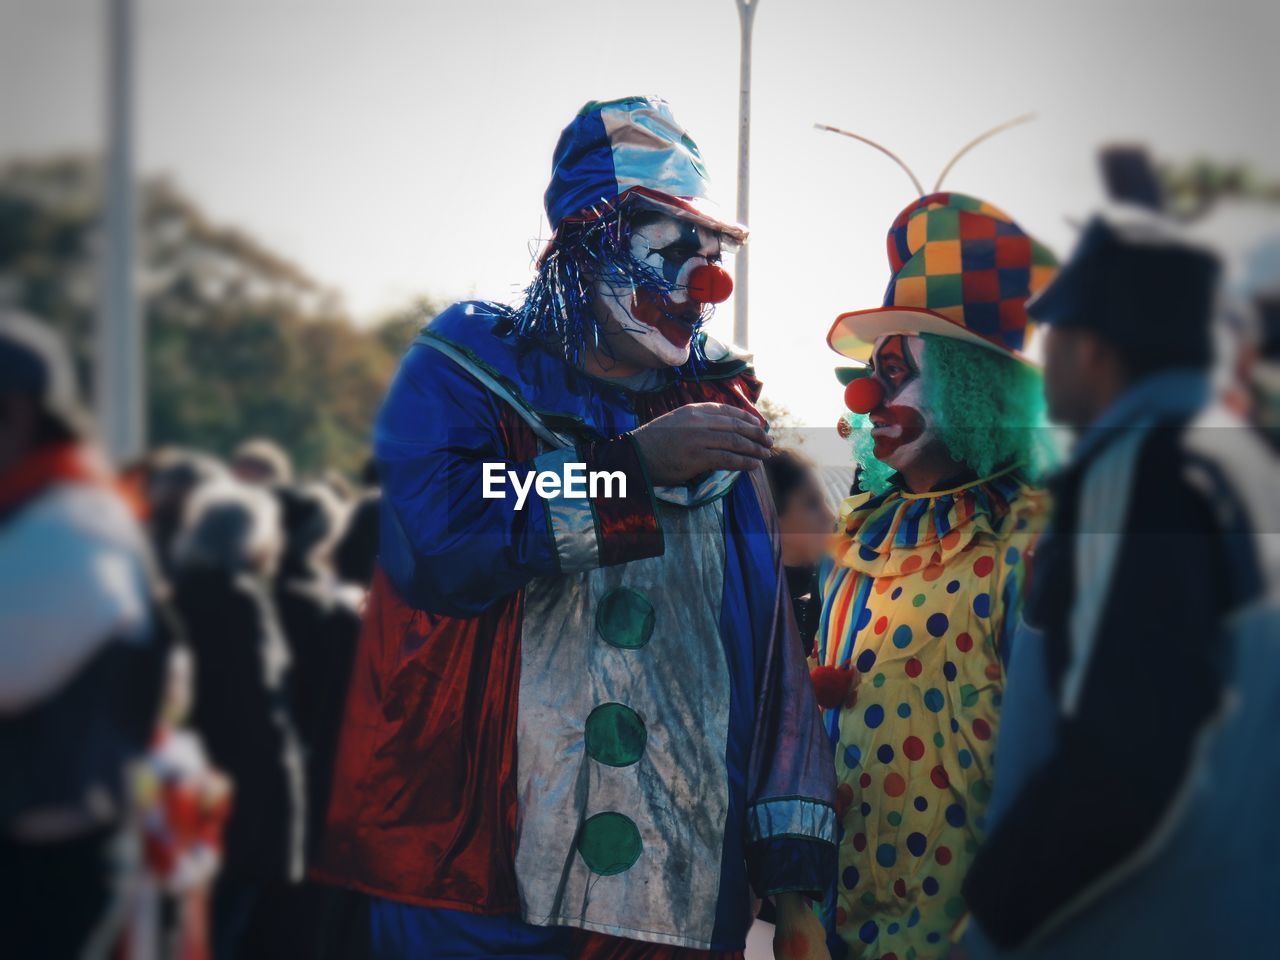 People wearing costumes during carnival